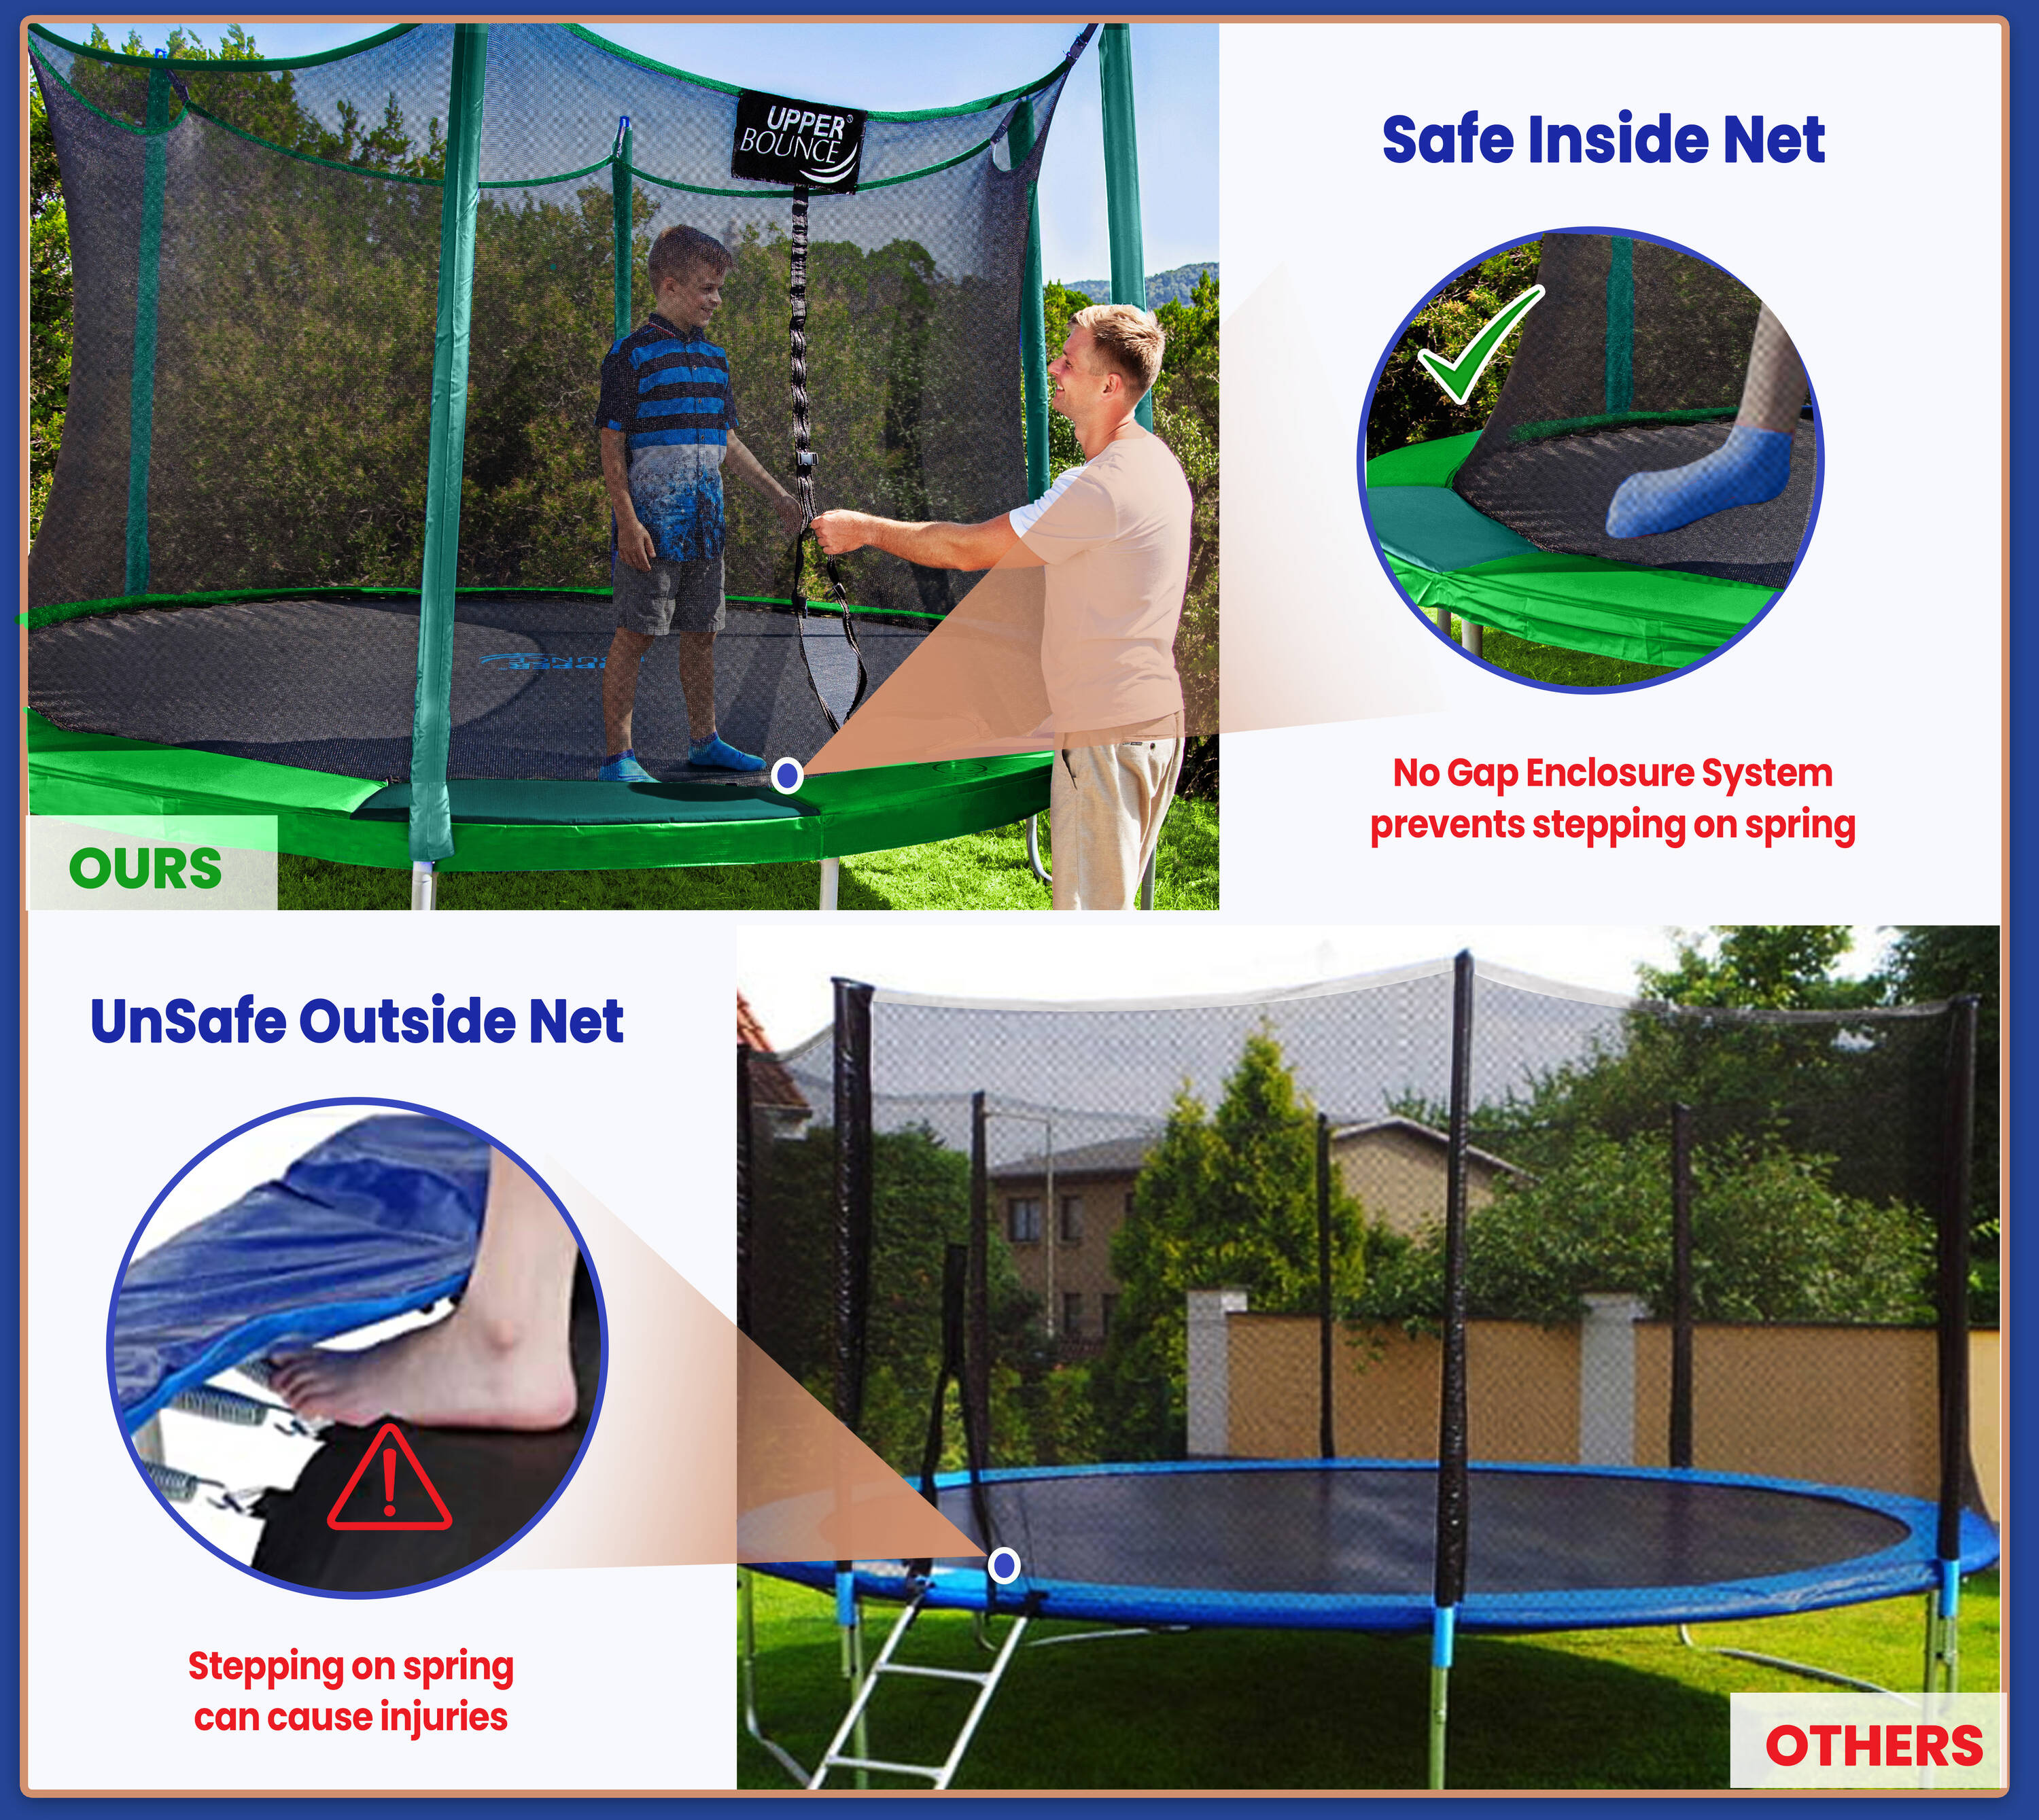 UpperBounce Upper Bounce 15-ft Round Backyard in Green in the